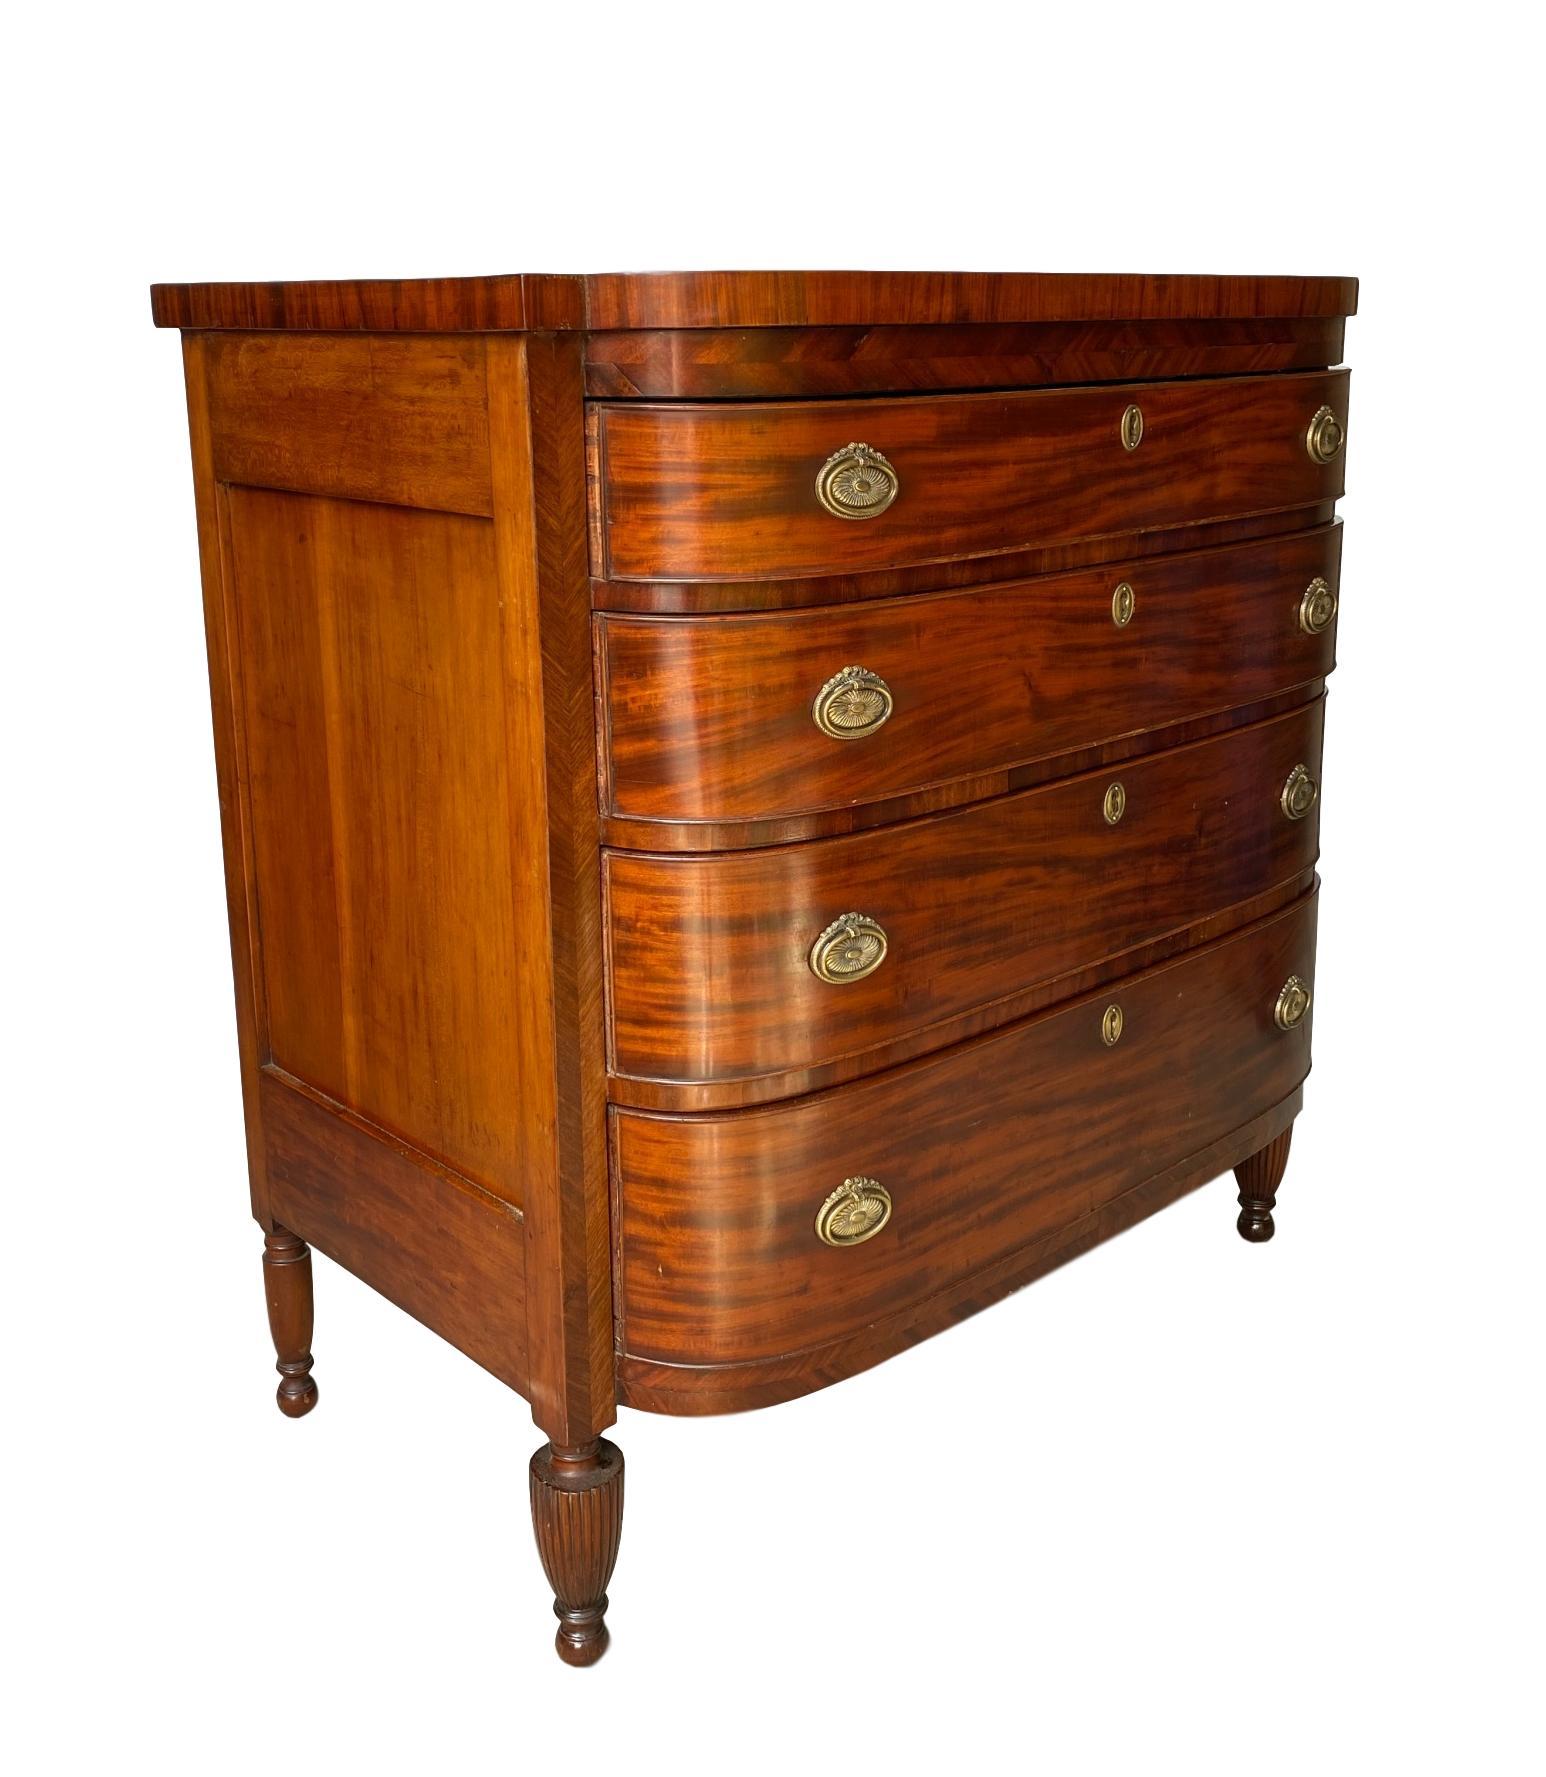 Flame mahogany bow-front chest-of-drawers/dresser, Scottish, circa 1860, with four long drawers with distinctive bowed ends and original brasses, with chevron inlay to the outer carcase, with shaped top, on turned and reeded legs.
In excellent